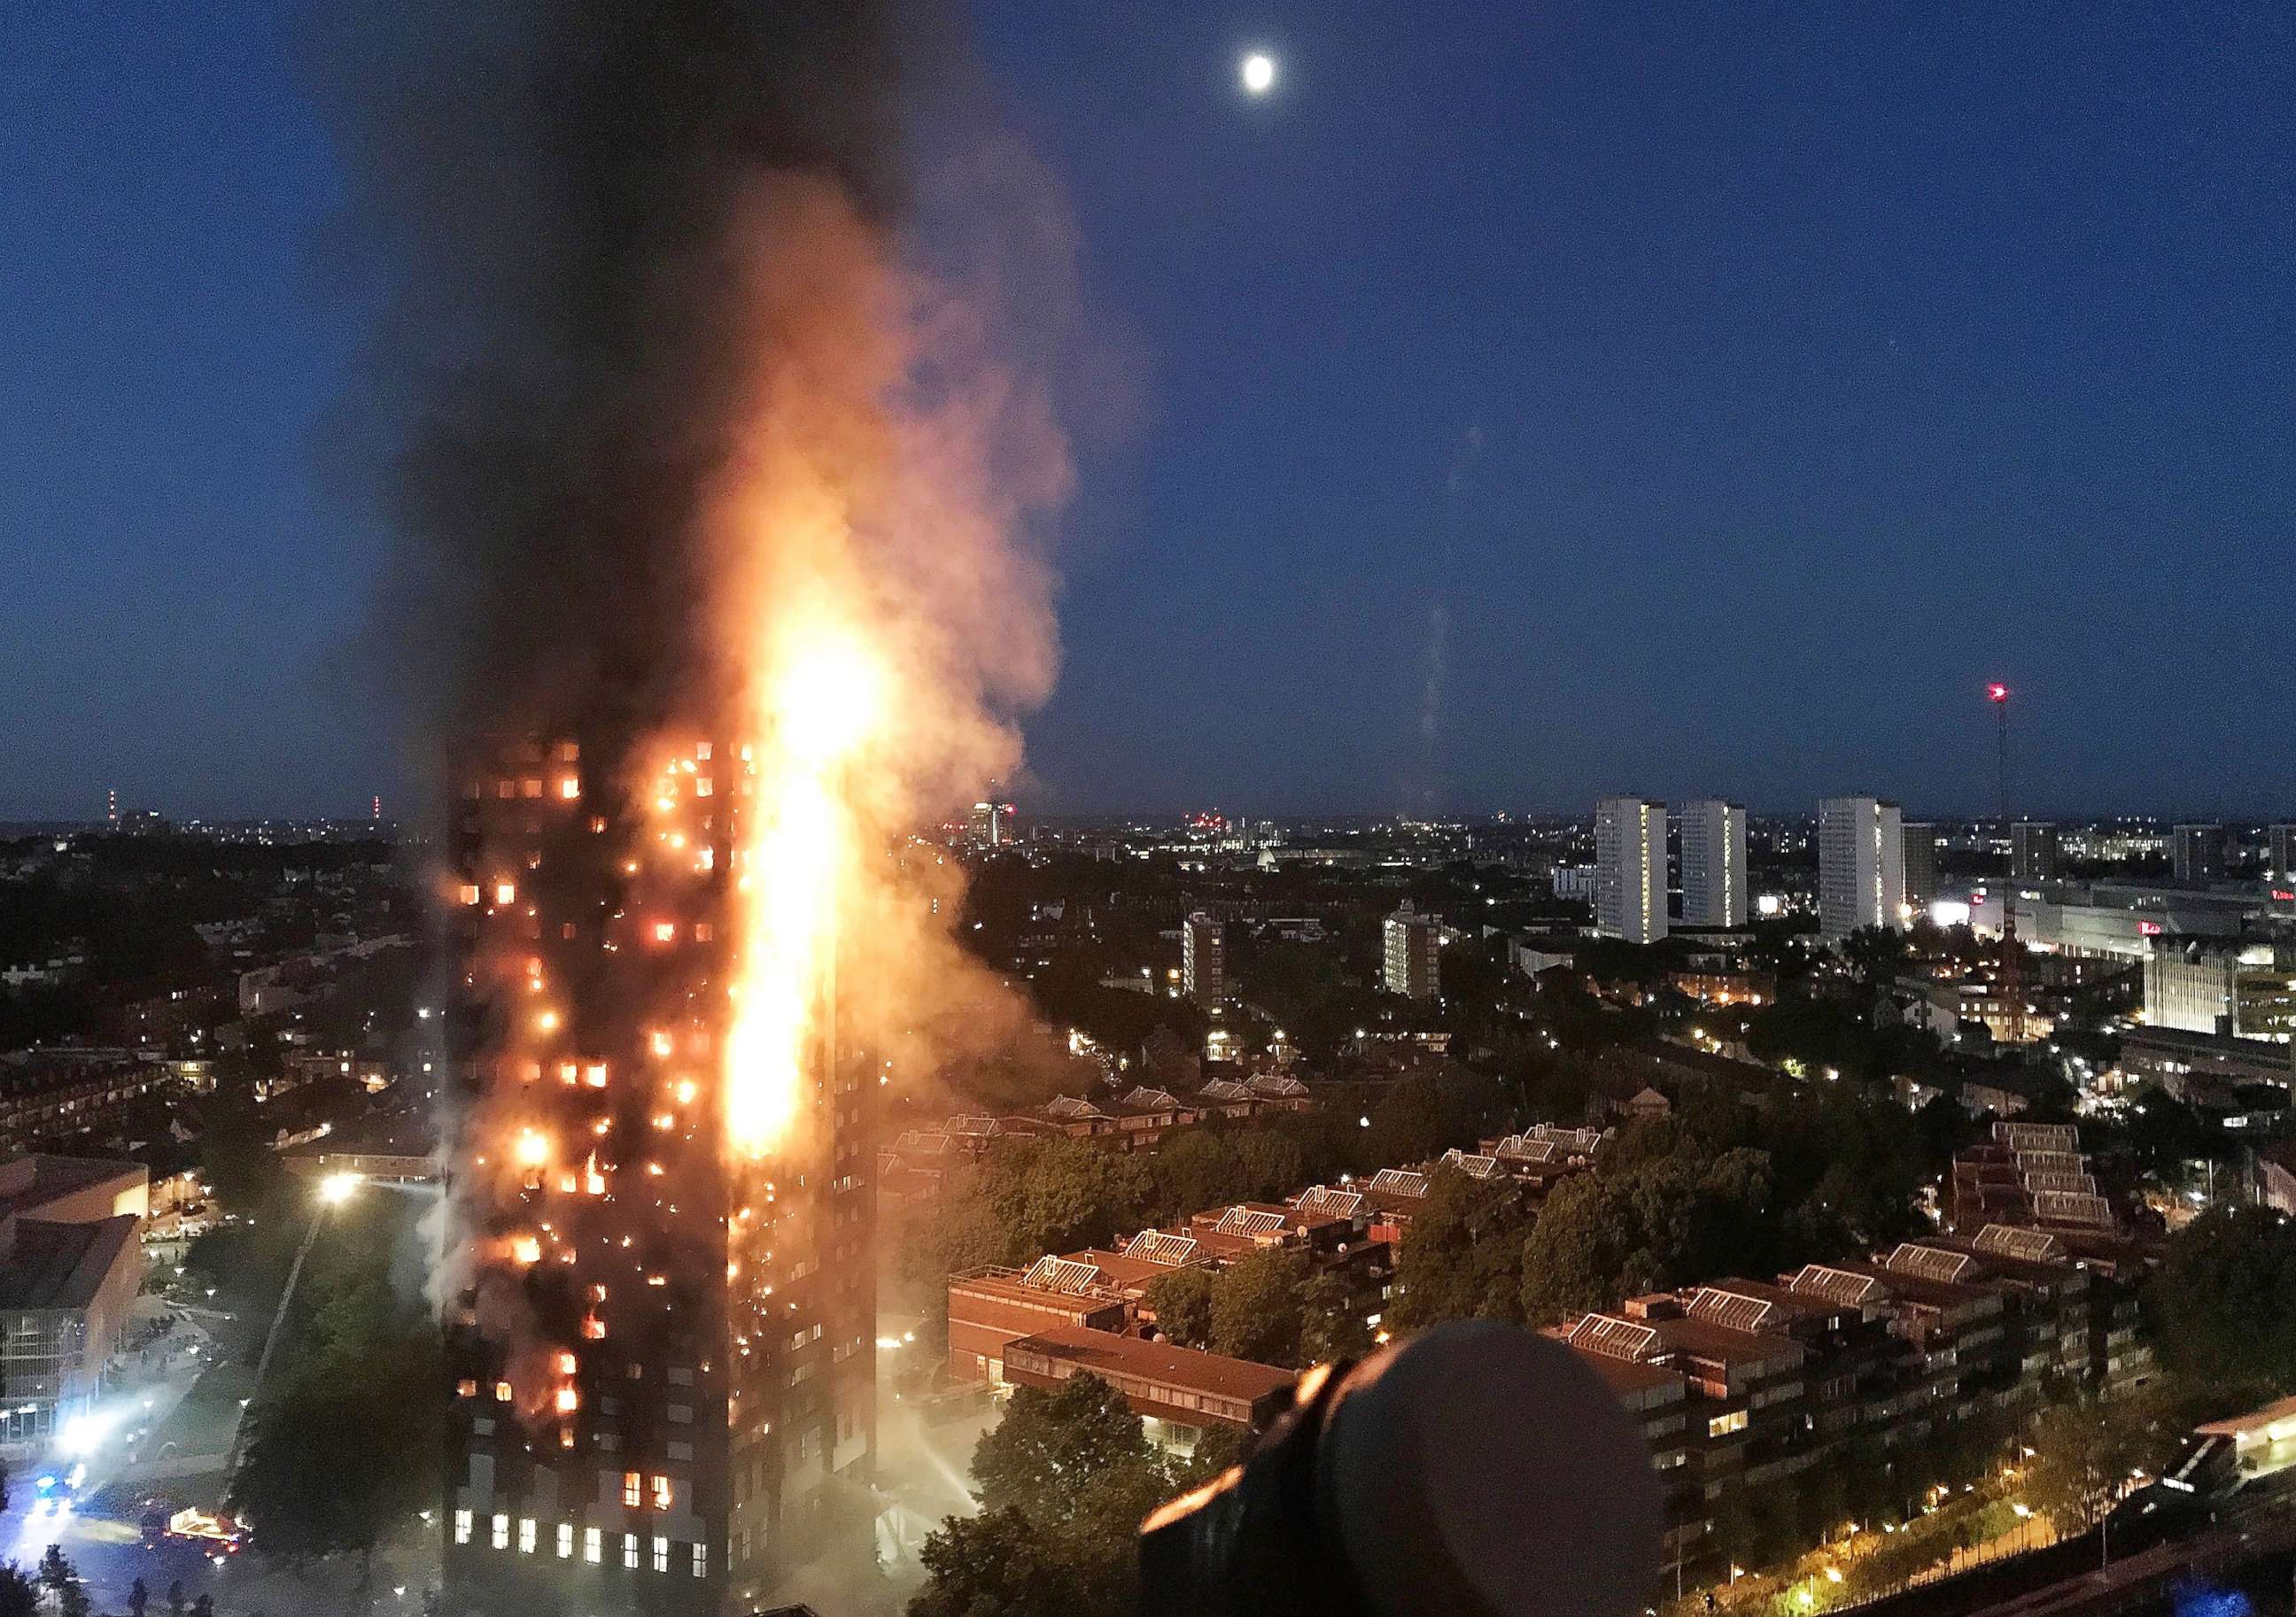 PHOTO: A huge fire engulfs the 24 story Grenfell Tower in Latimer Road, West London in the early hours of this morning in this June 14, 2017 file photo in London.